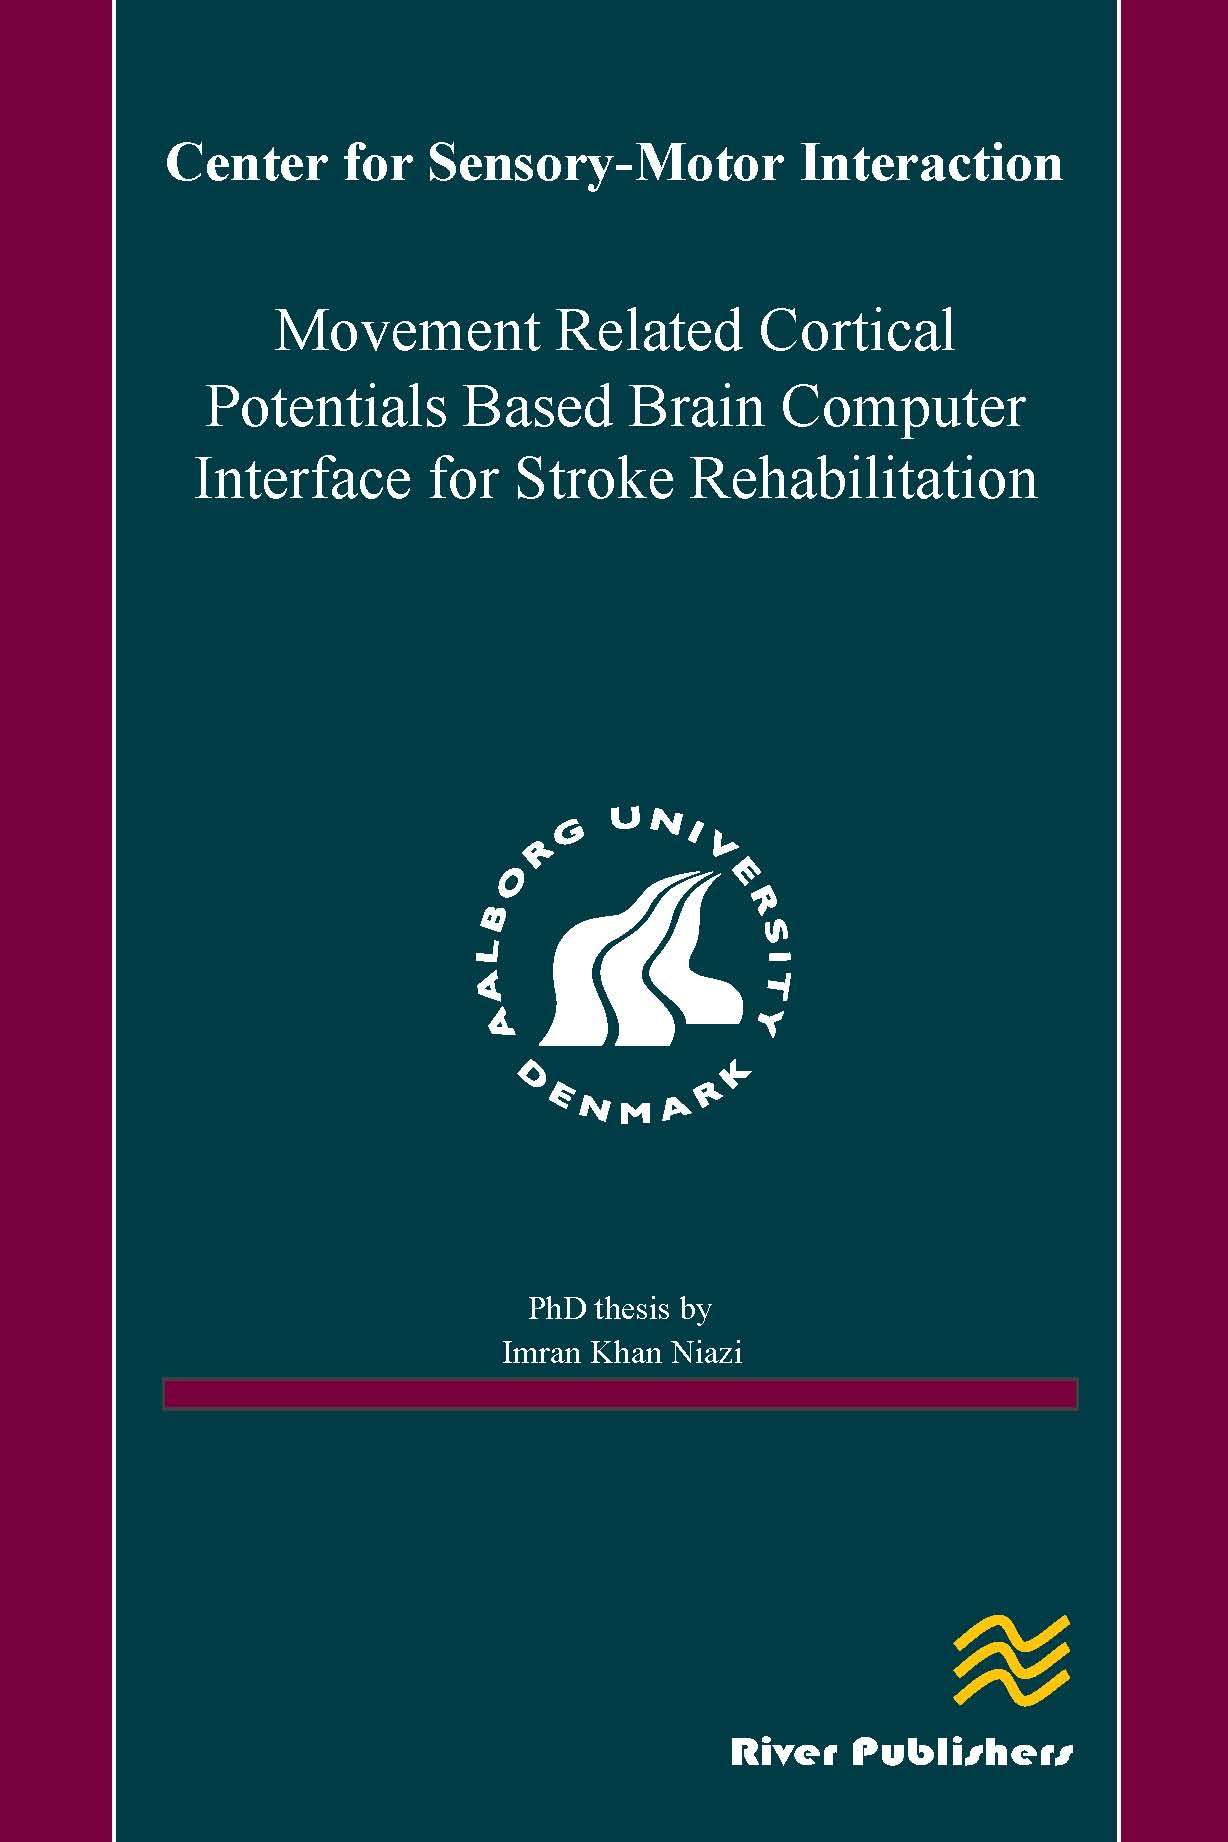 Movement Related Cortical Potentials Based Brain Computer Interface for Stroke Rehabilitation